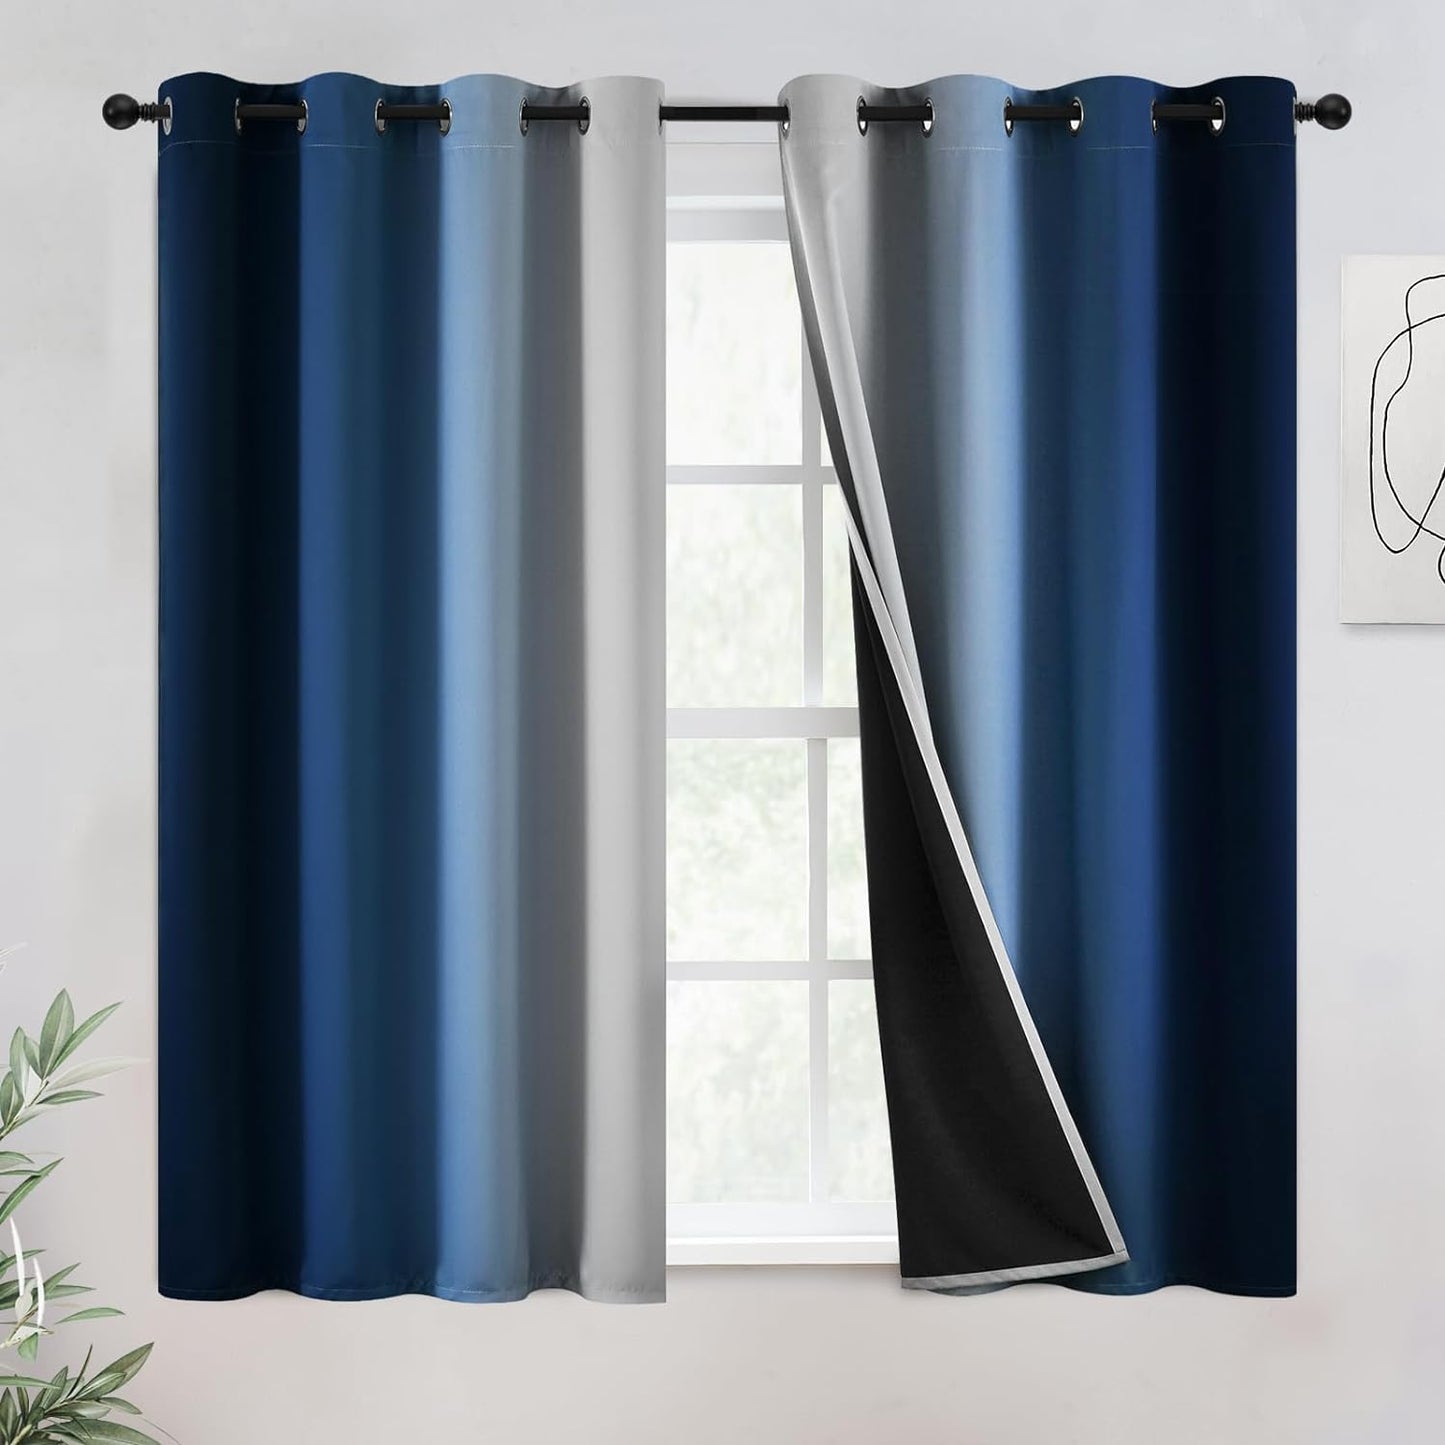 COSVIYA 100% Blackout Curtains & Drapes Ombre Purple Curtains 63 Inch Length 2 Panels,Full Room Darkening Grommet Gradient Insulated Thermal Window Curtains for Bedroom/Living Room,52X63 Inches  COSVIYA Blue To Greyish White 52W X 54L 